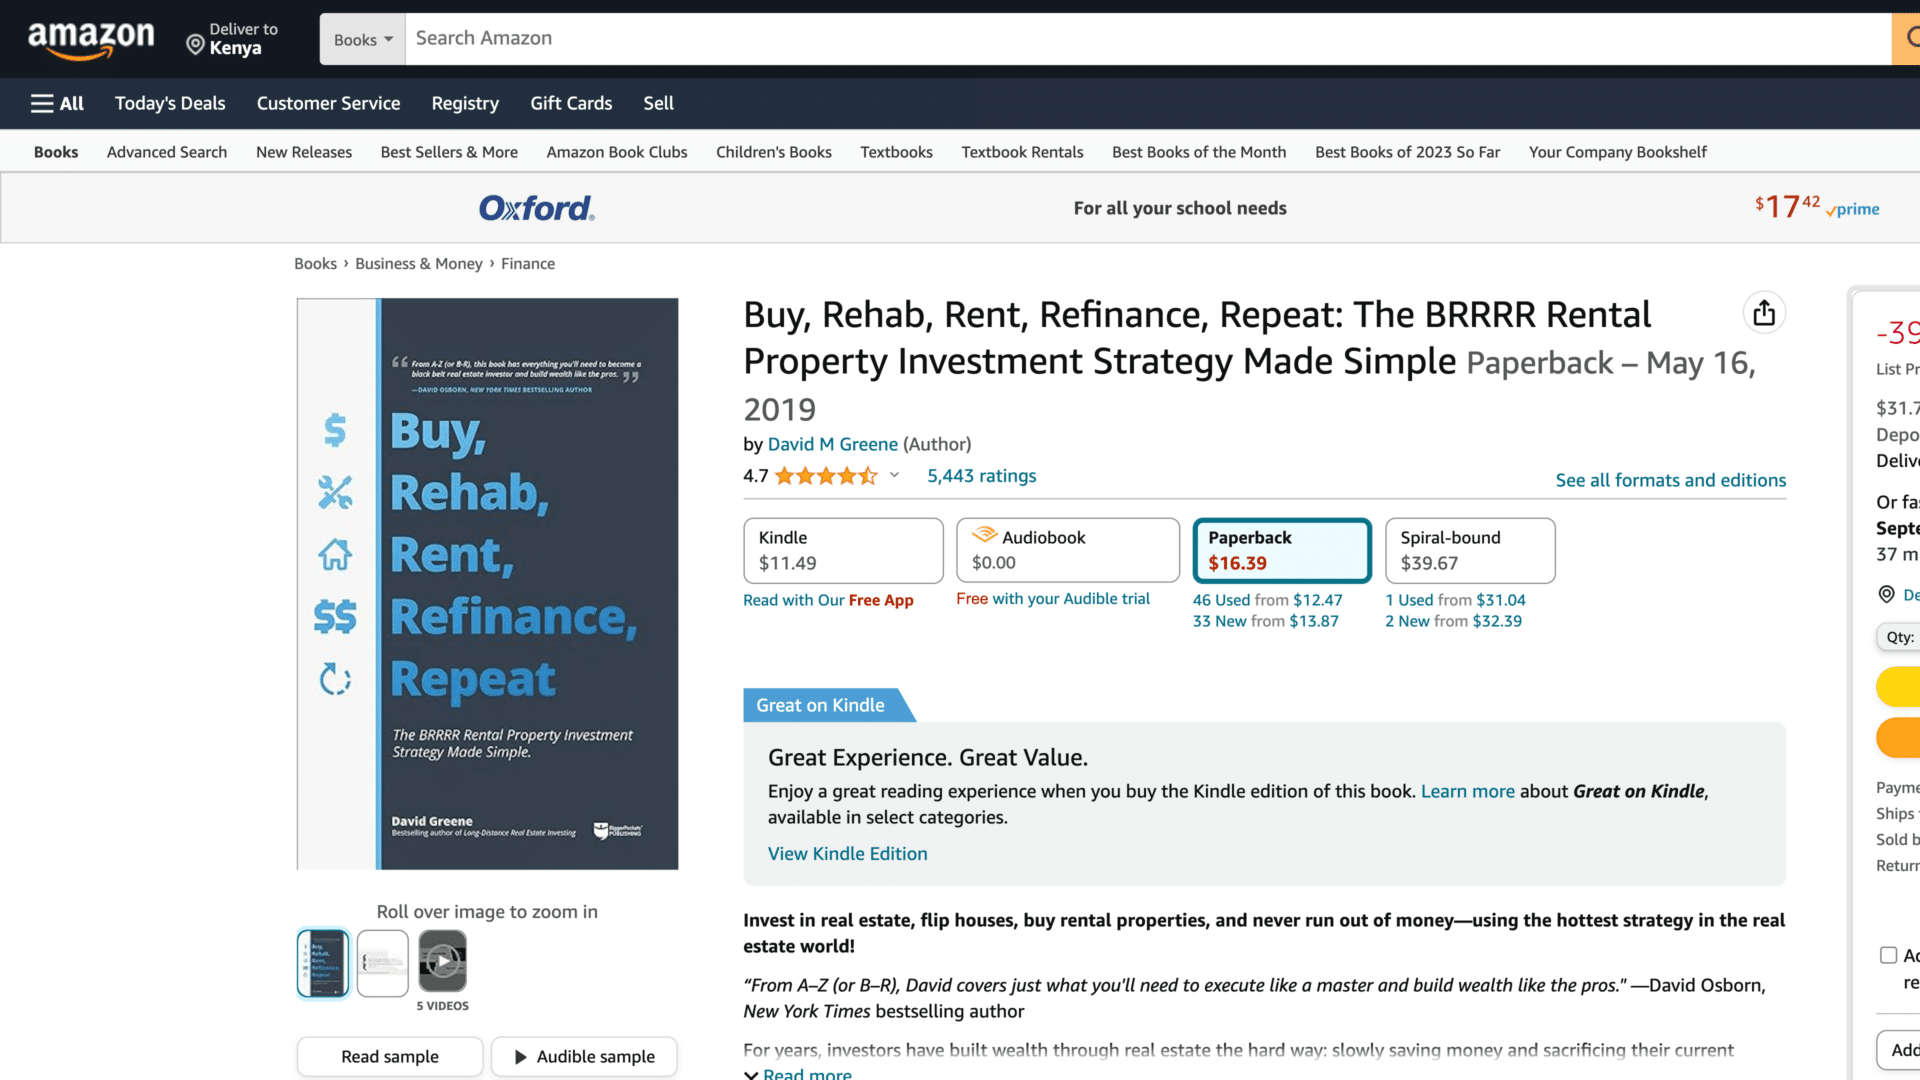 a screenshot of the Buy, Rehab, Rent, Refinance, Repeat (BRRR) homepage